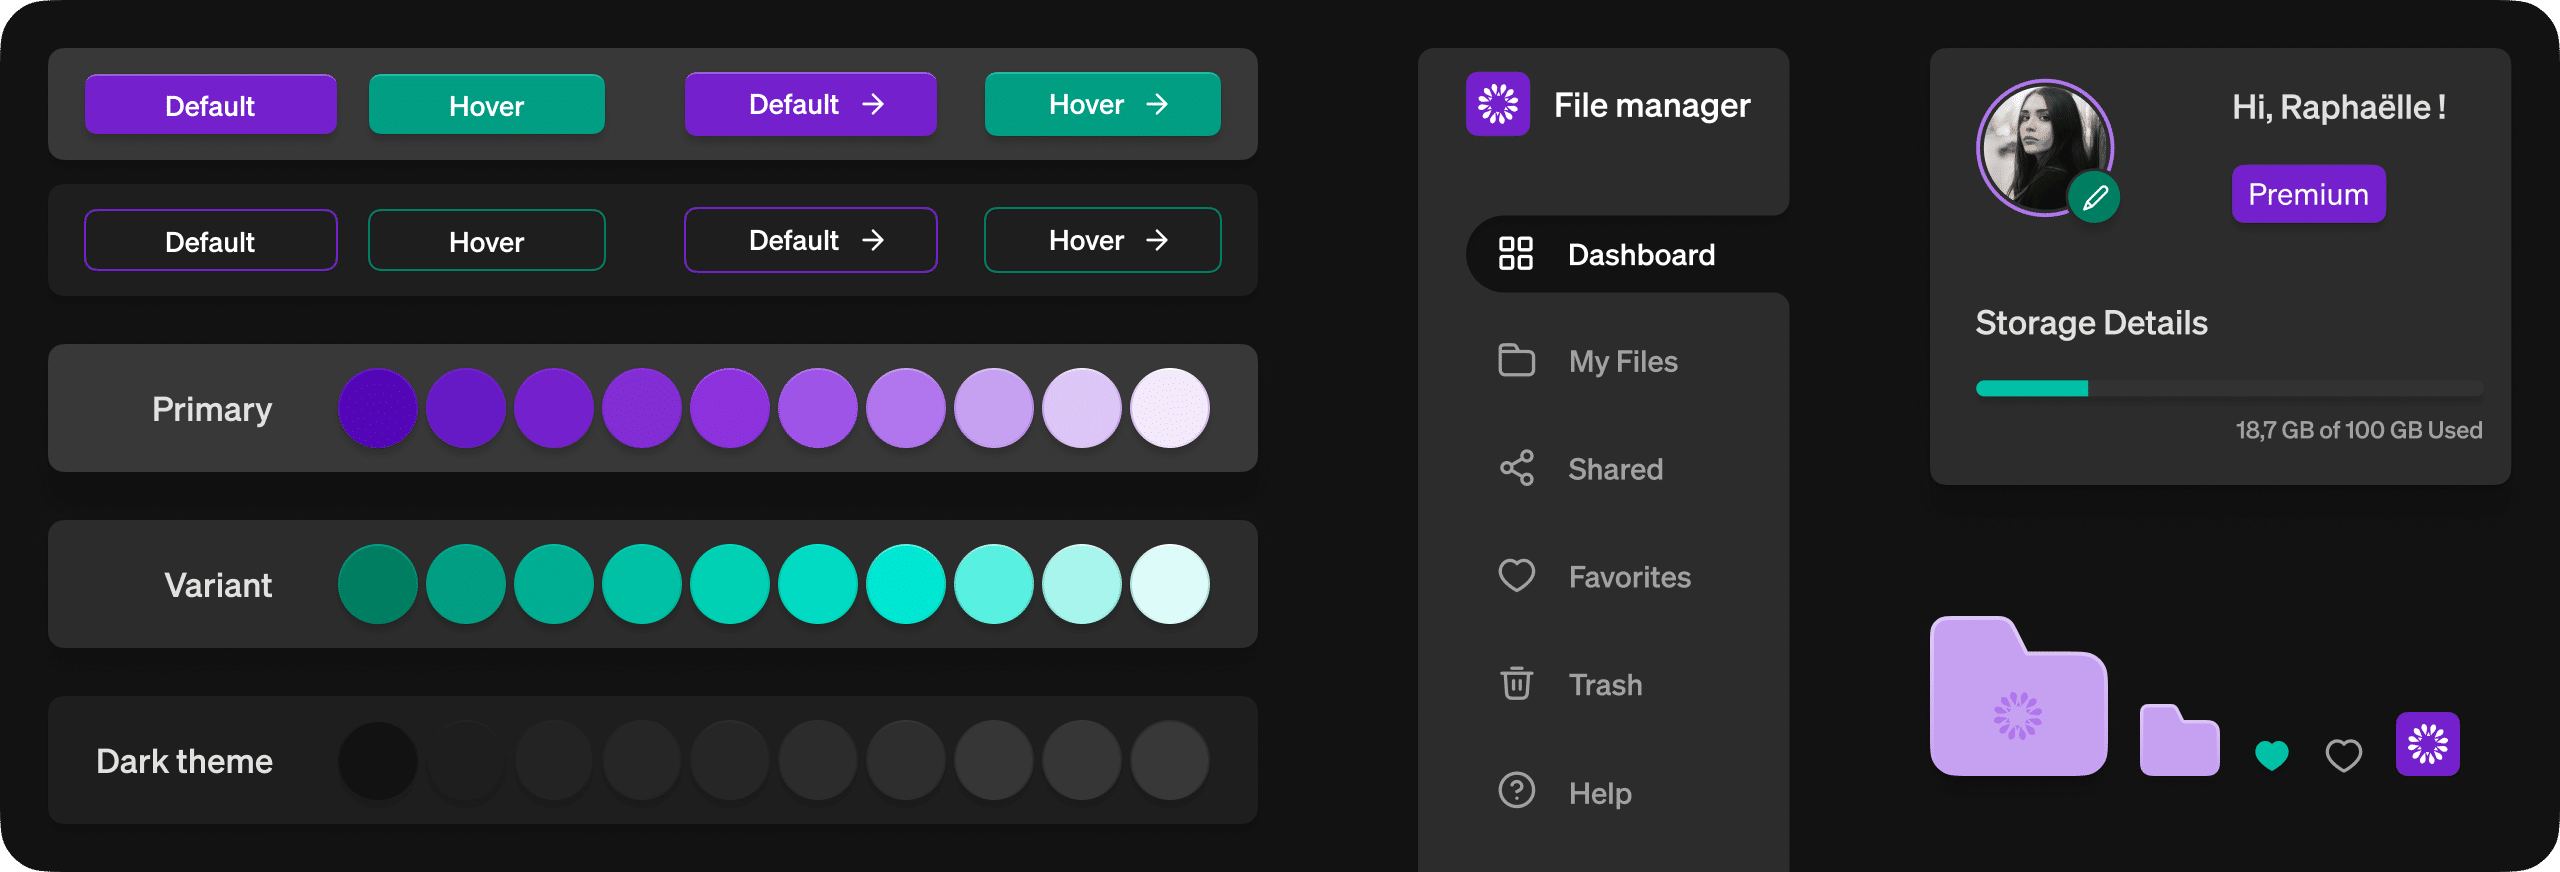 file-manager-dashboard-ui-kit-design-system-color-assets-icons-buttons-menu-dark-theme